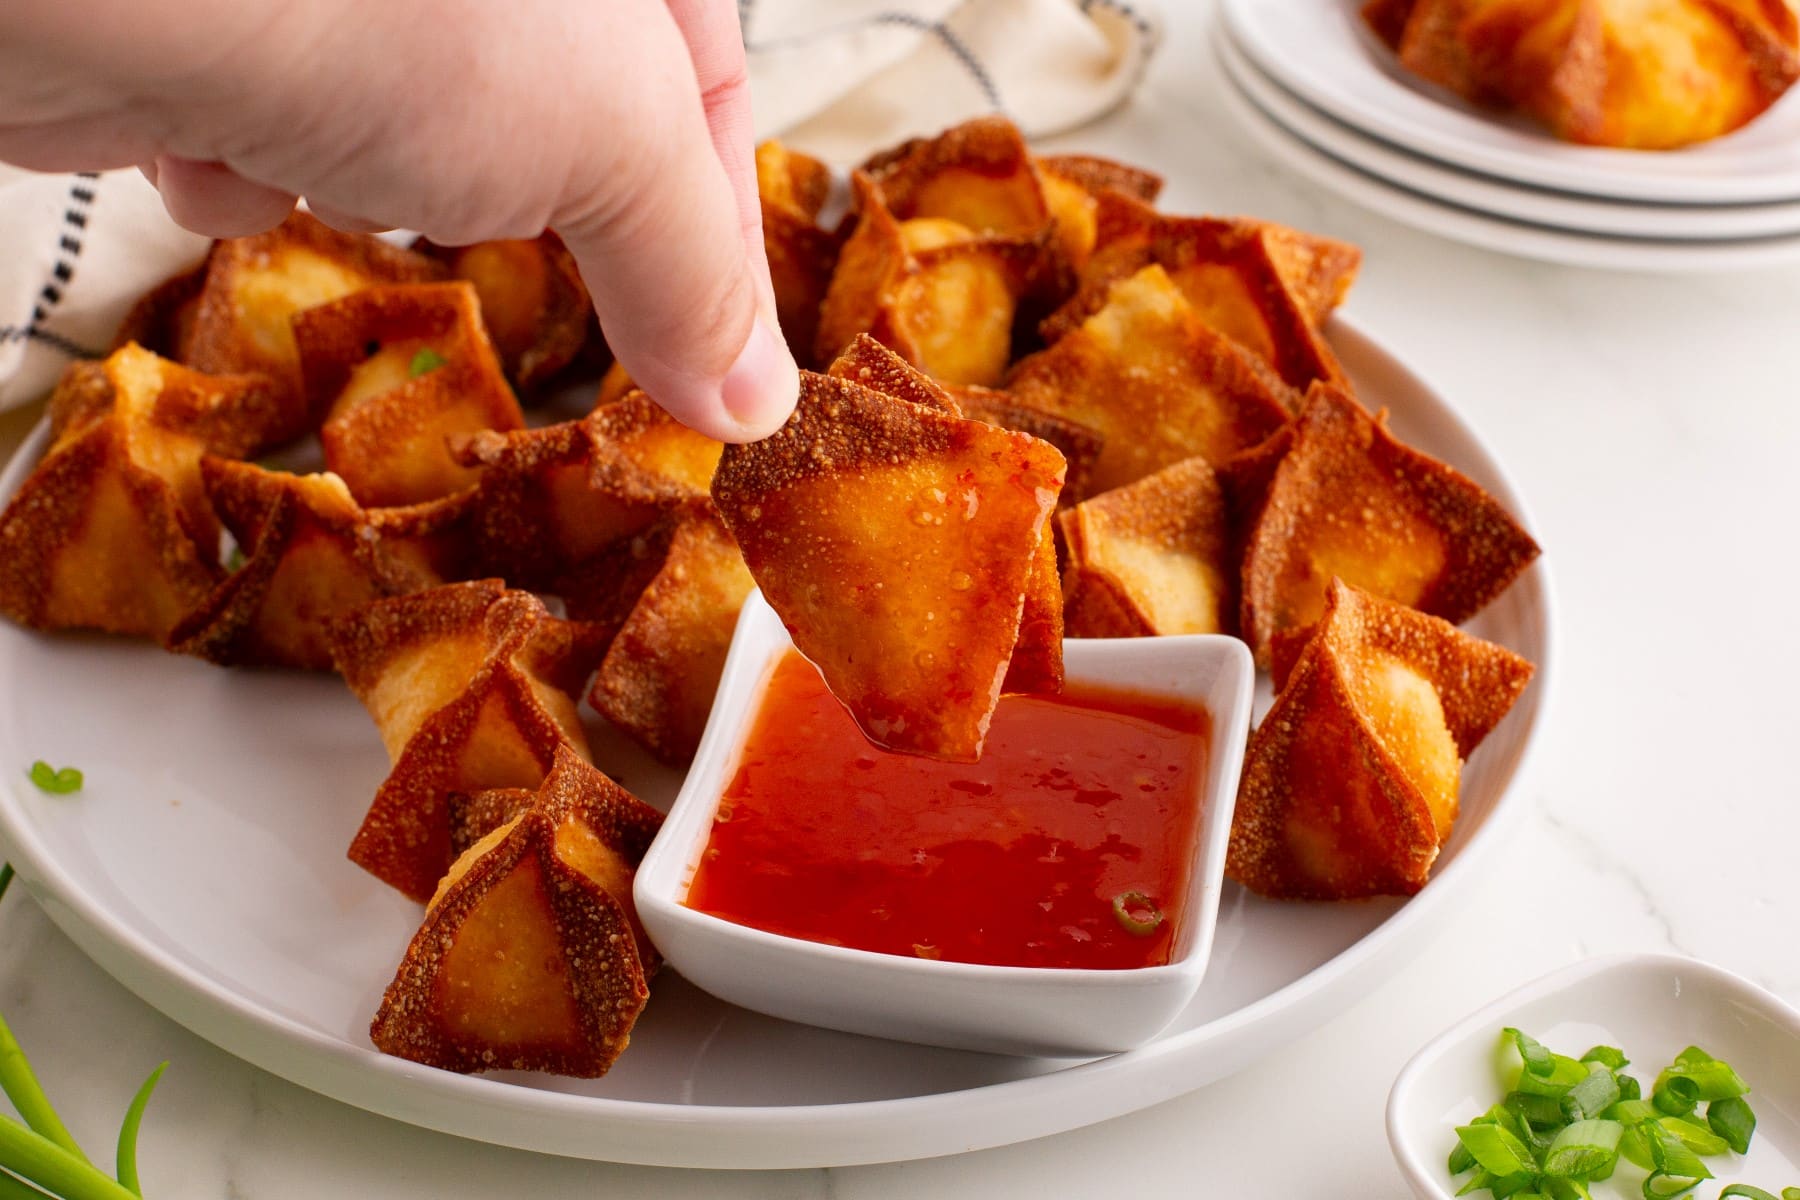 Crab Rangoon wonton held in 2 fingers being dipped into a dipping sauce.